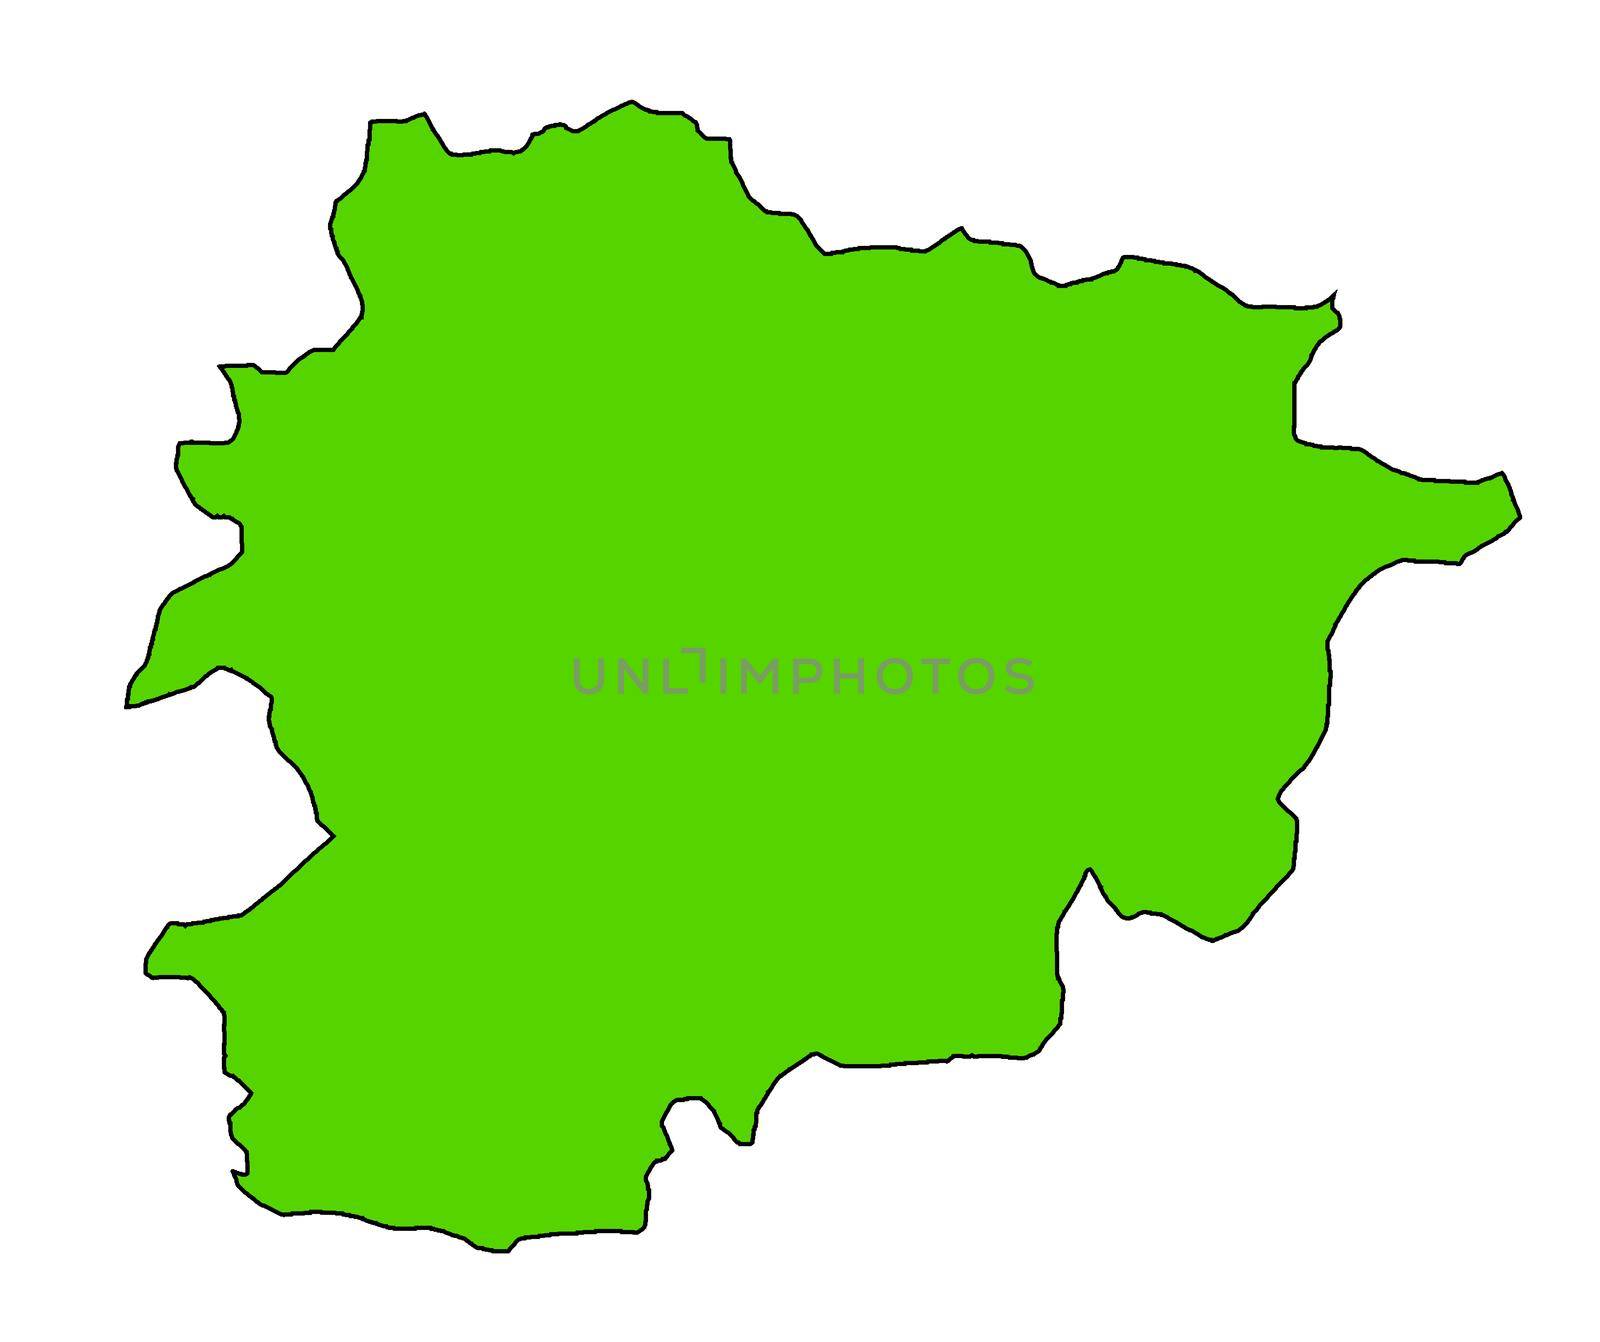 Outline silhouette map of Andorra a European country in green and isolated on a white background